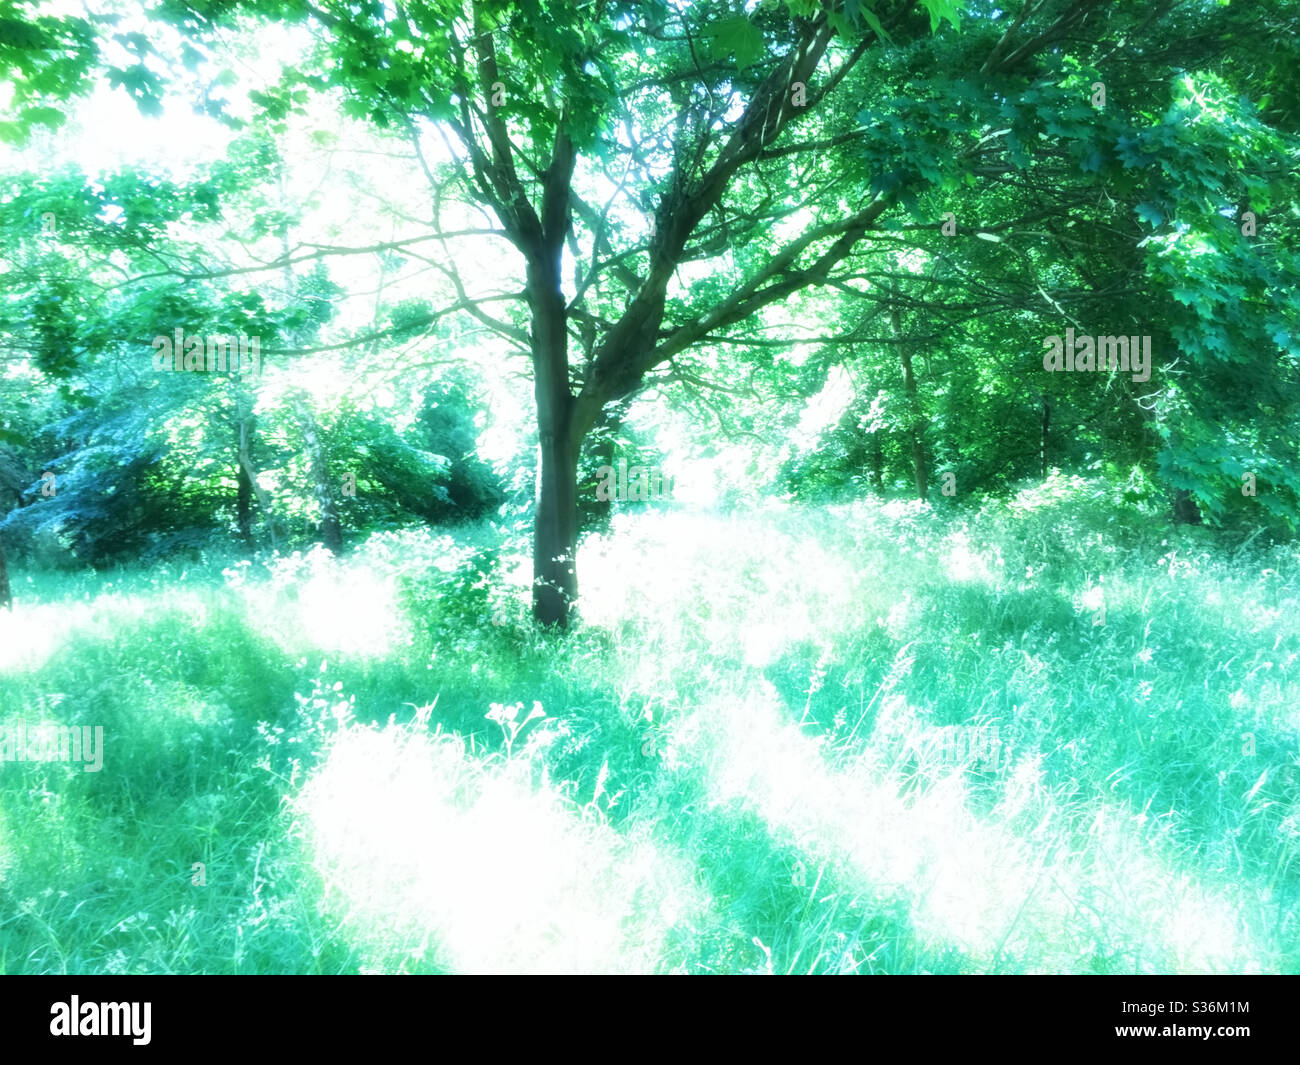 Sunlight bursting through the branches of trees fills a grassy space with patches of brilliant white.  The leaves and grass are cool mint greens and the light has a beautiful glowing quality. Stock Photo